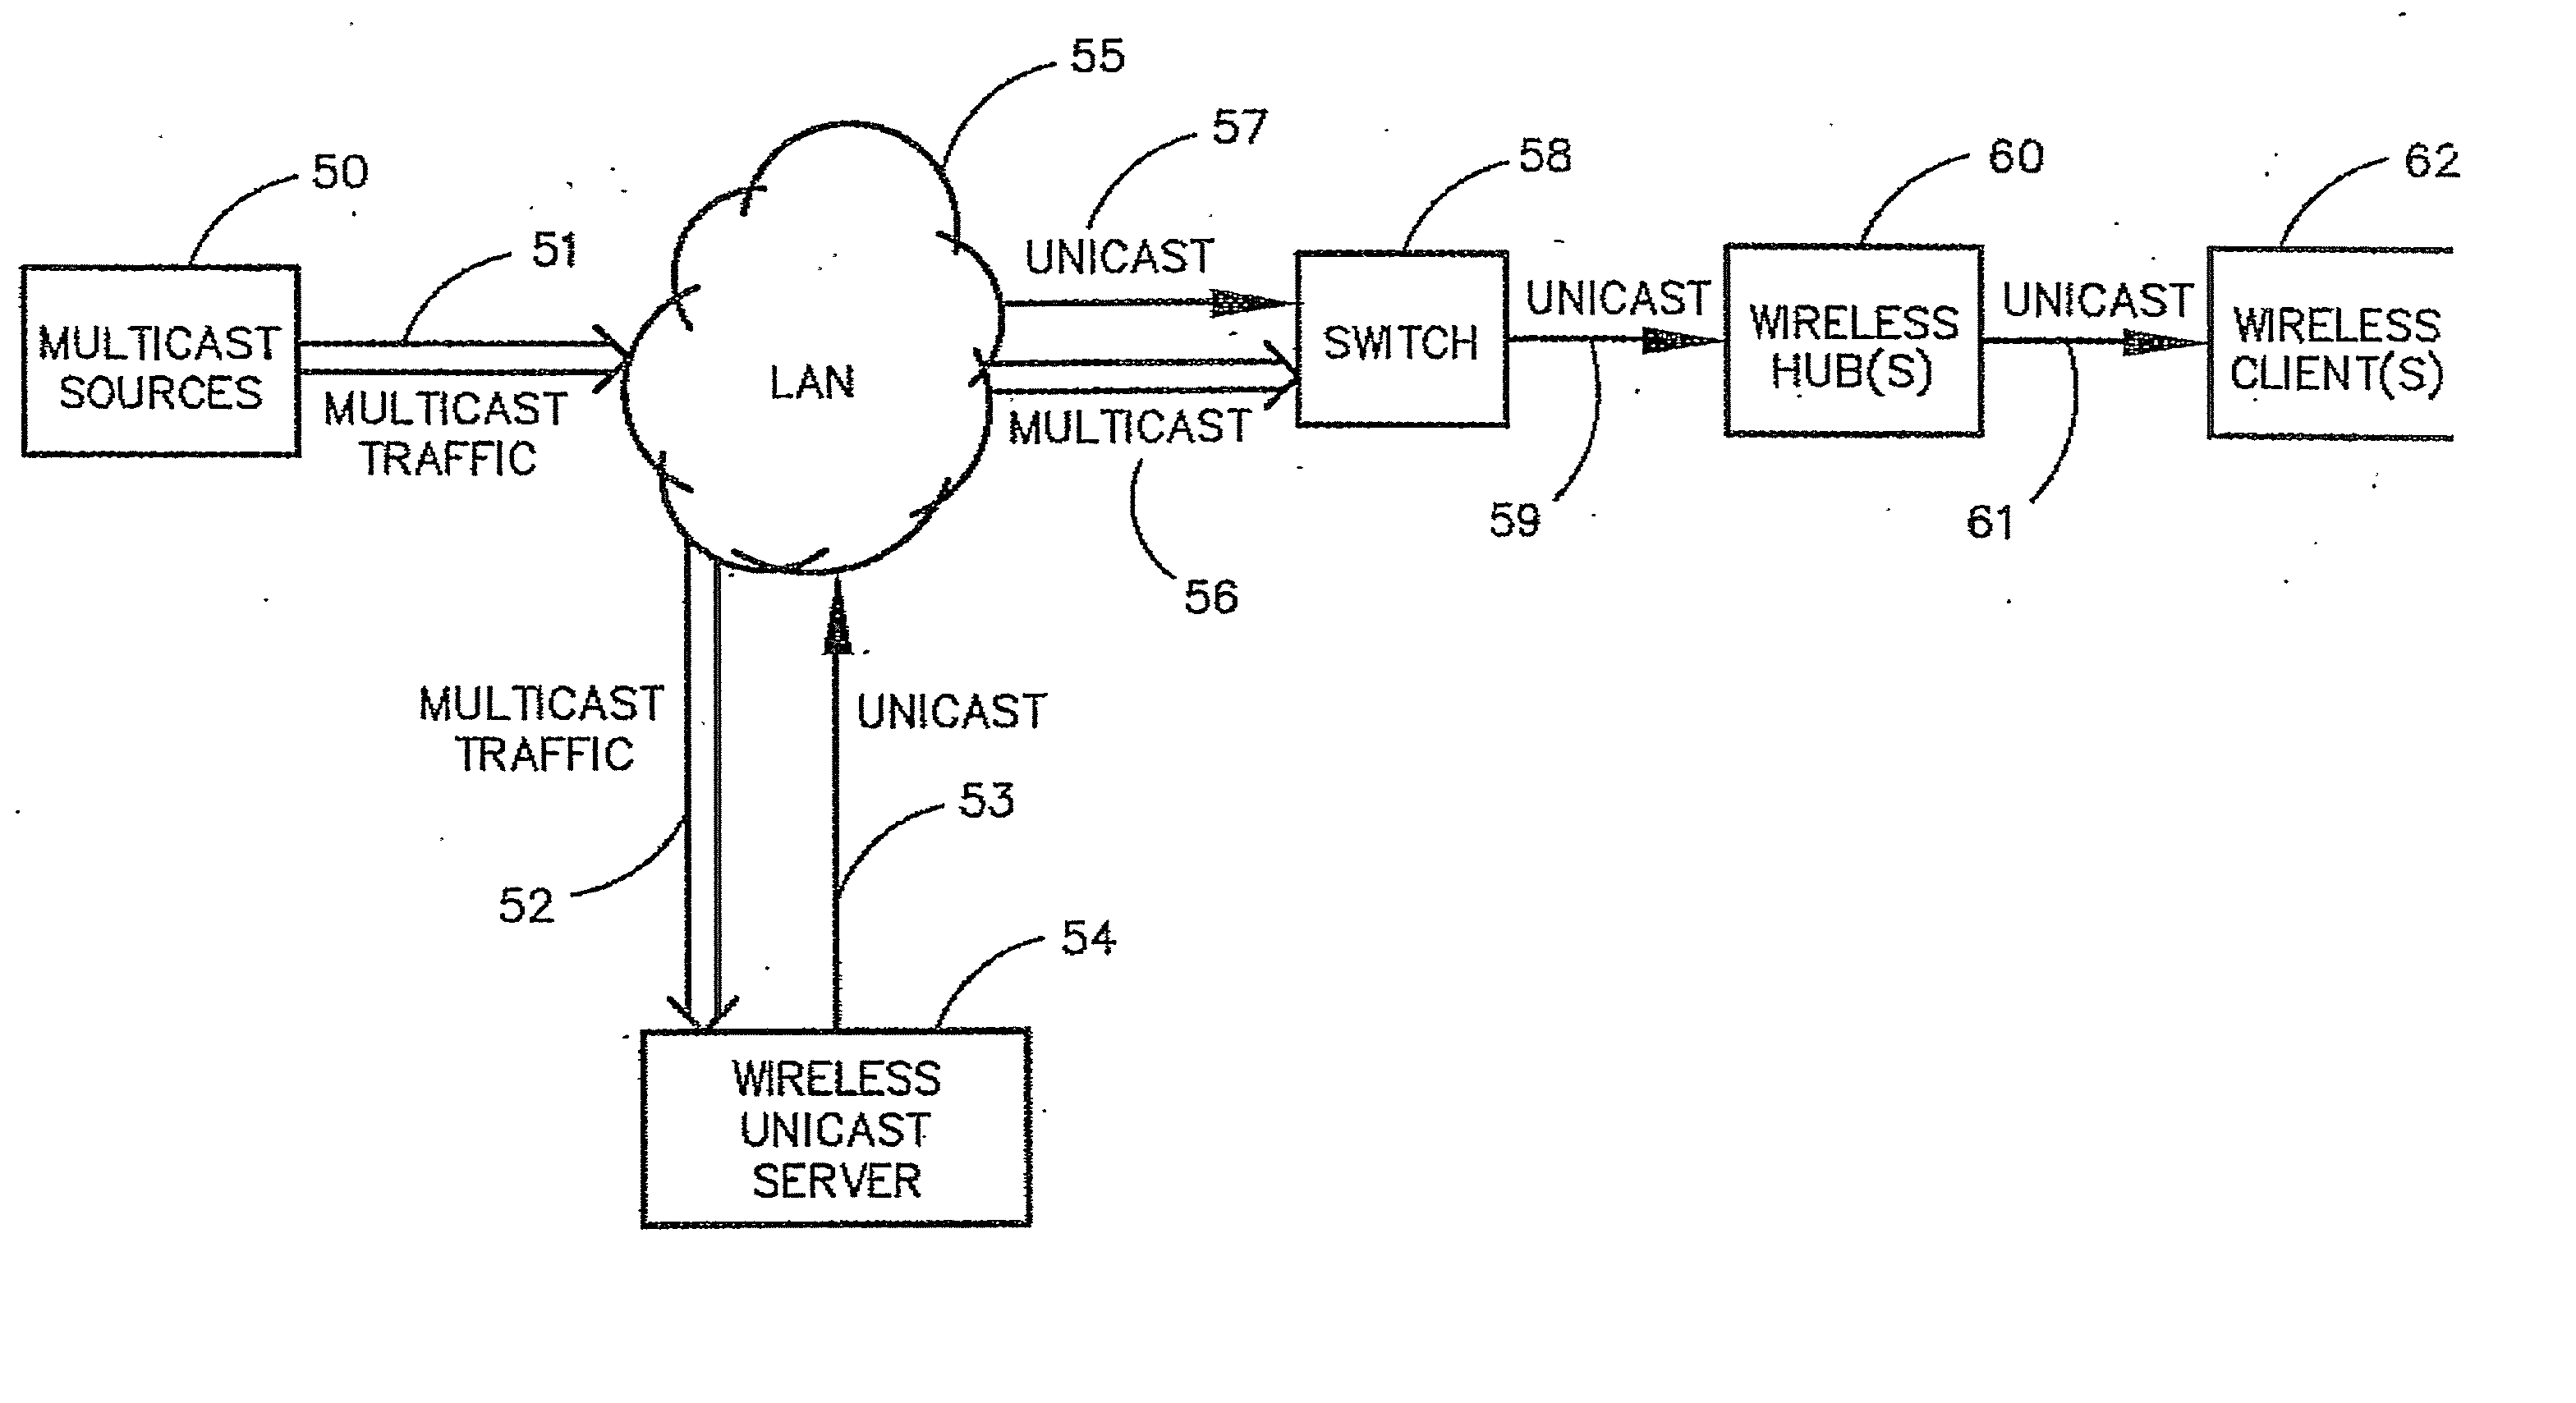 Portable Wireless Monitoring and Control Station for Use in Connection With a Multi-media Surveillance System Having Enhanced Notification Functions